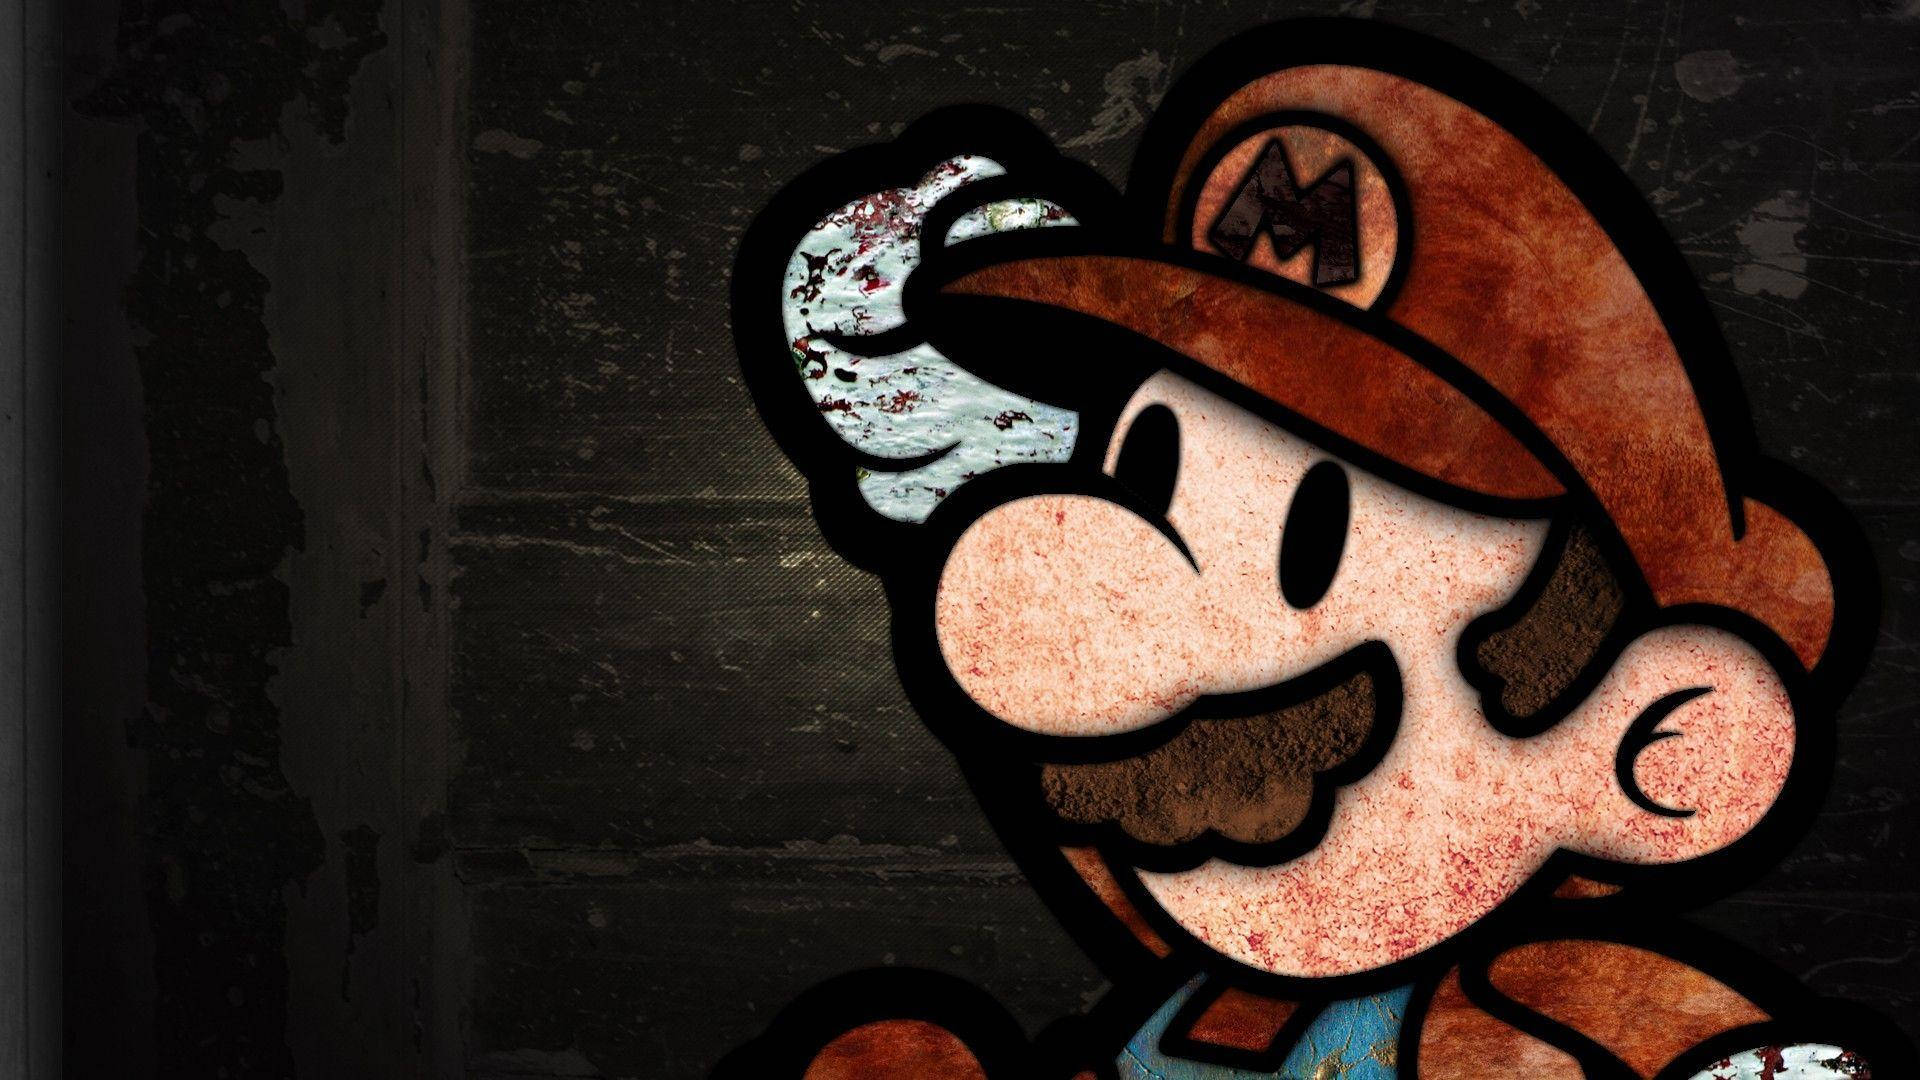 Mario 1920X1080 Wallpaper and Background Image